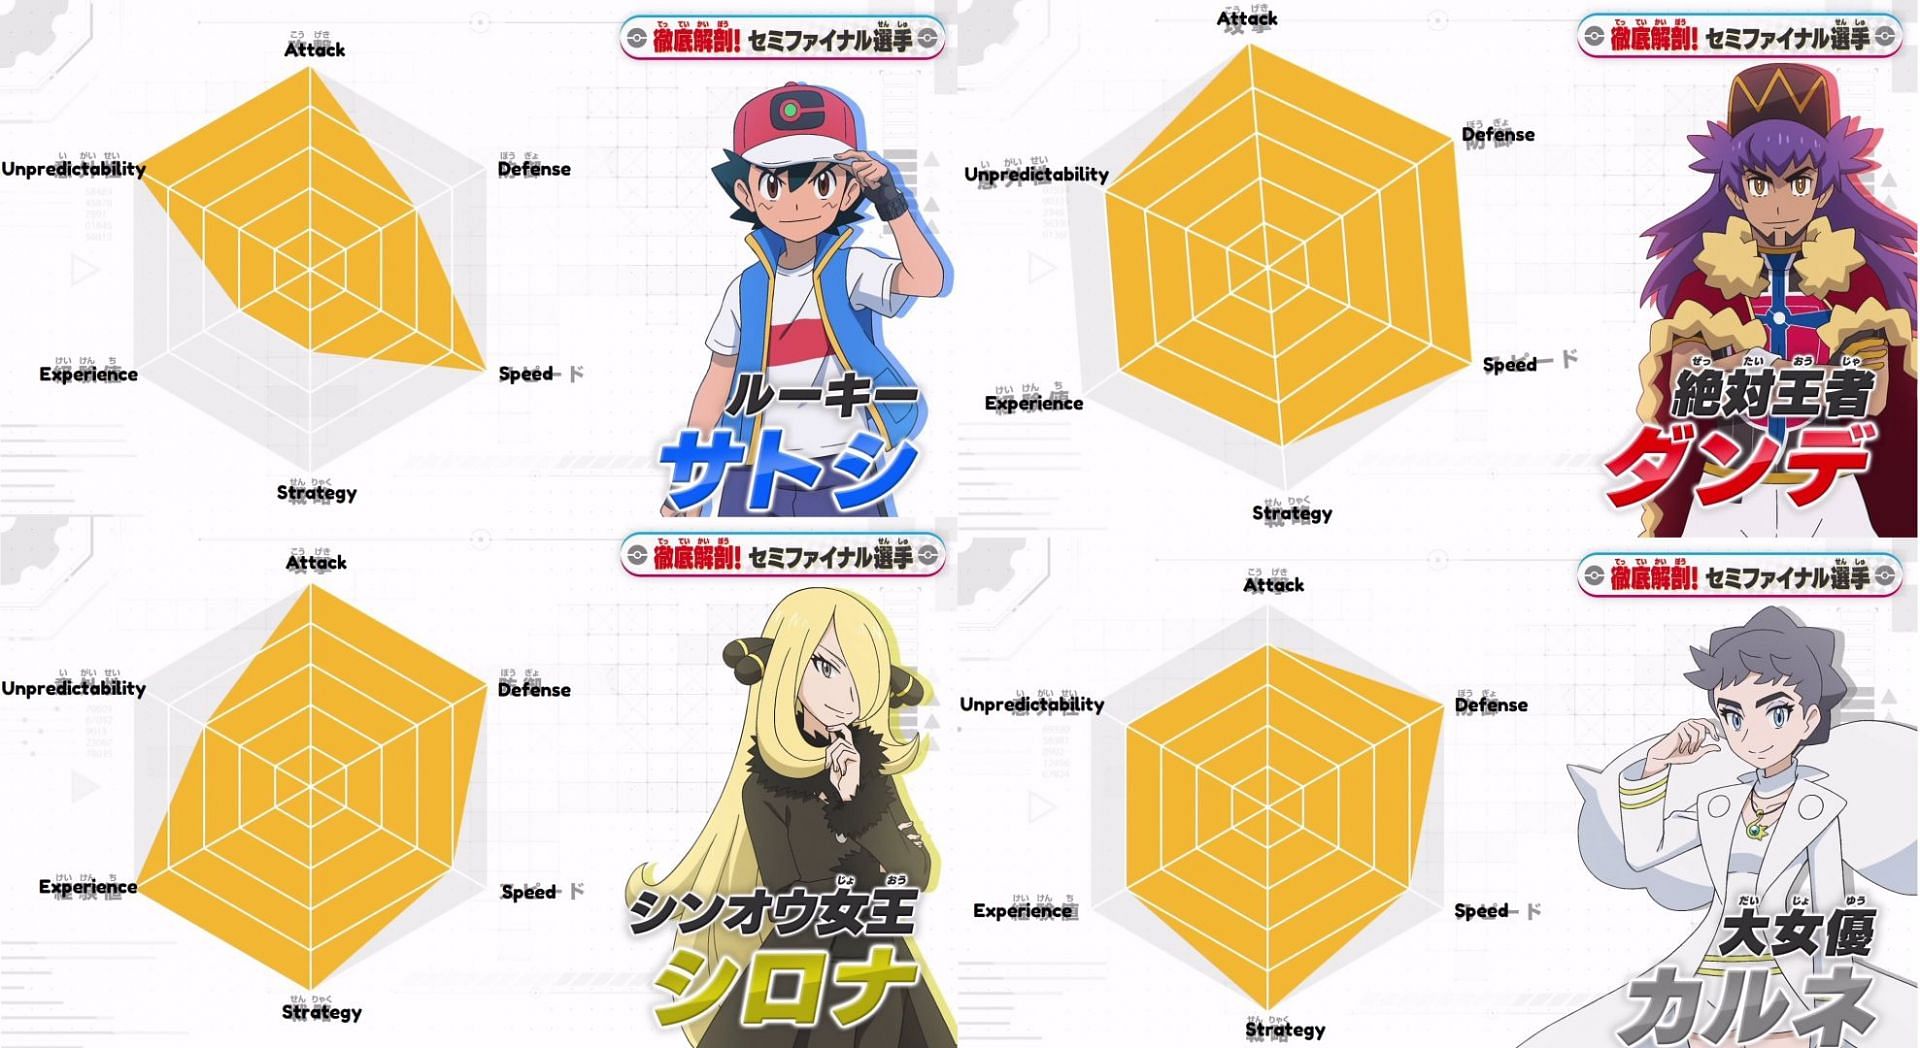 The official stats of the semifinalists for this anime arc (Image via Pokemon Company)